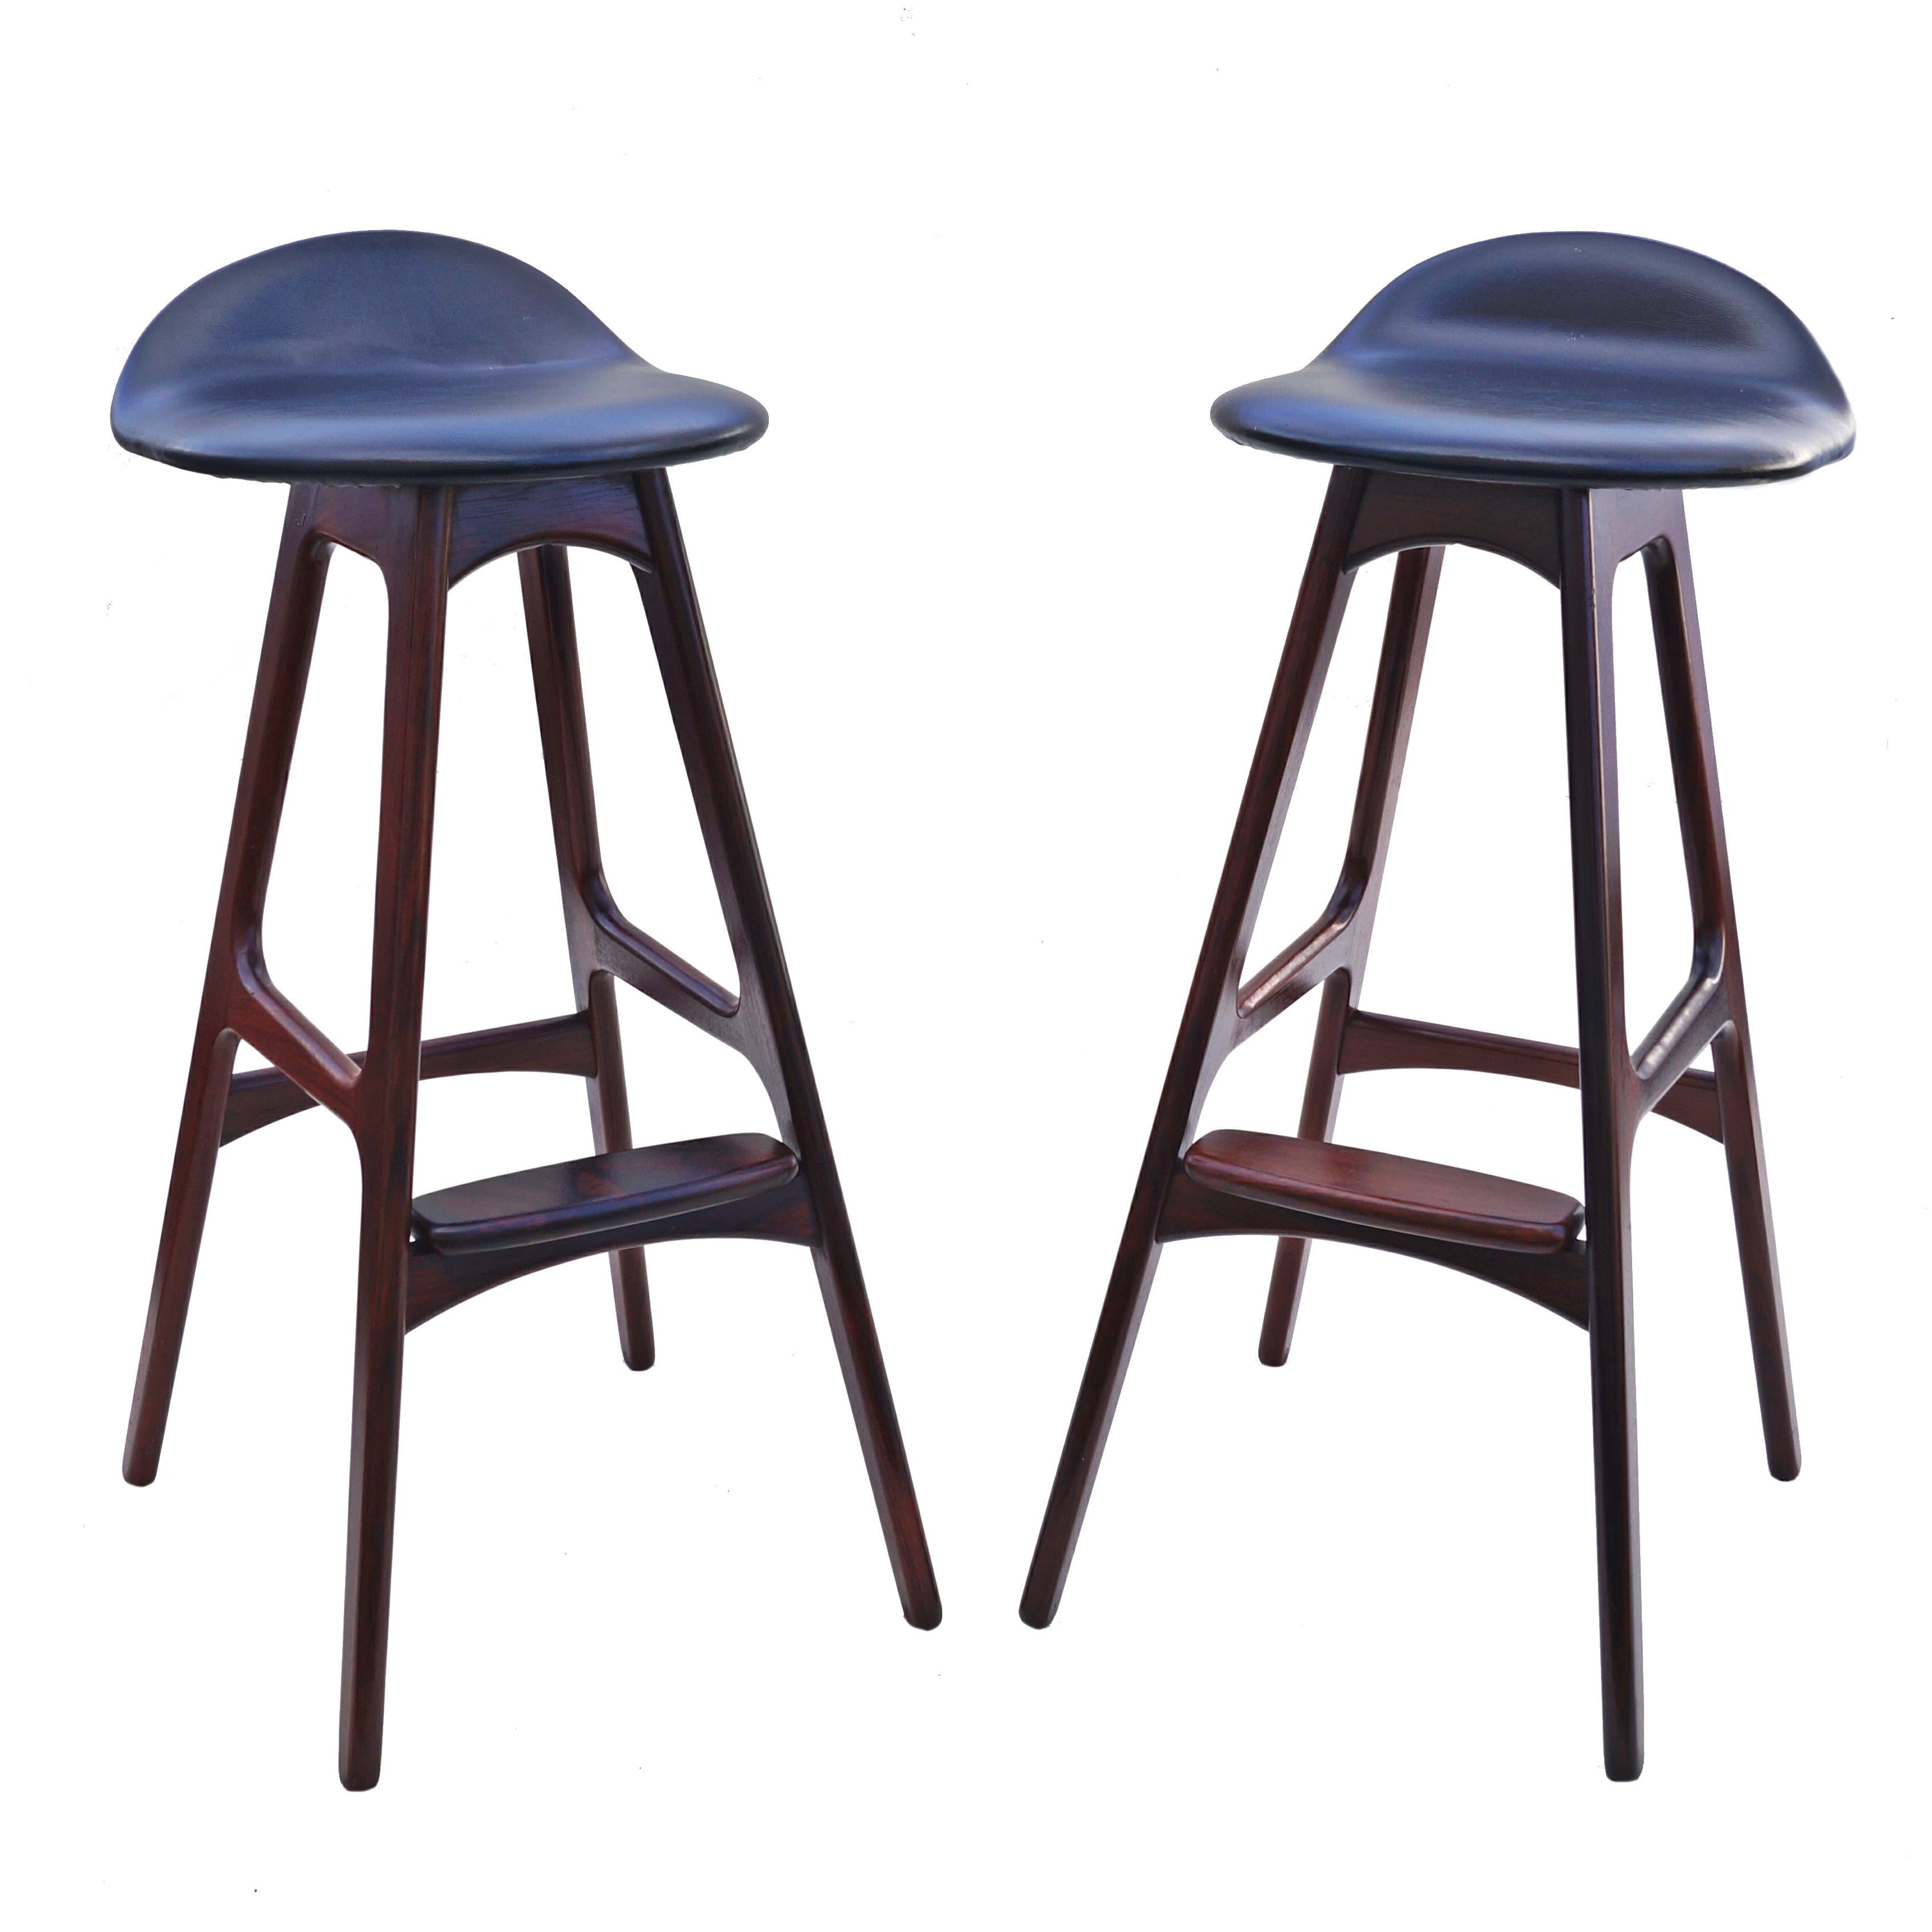 Pair of Erik Buch Buck OD-61 vintage bar stools rosewood.
If you are in the New Jersey , New York City Metro Area , please contact us with your delivery zip code, as we may be able to deliver curbside for less than the calculated White Glove rates